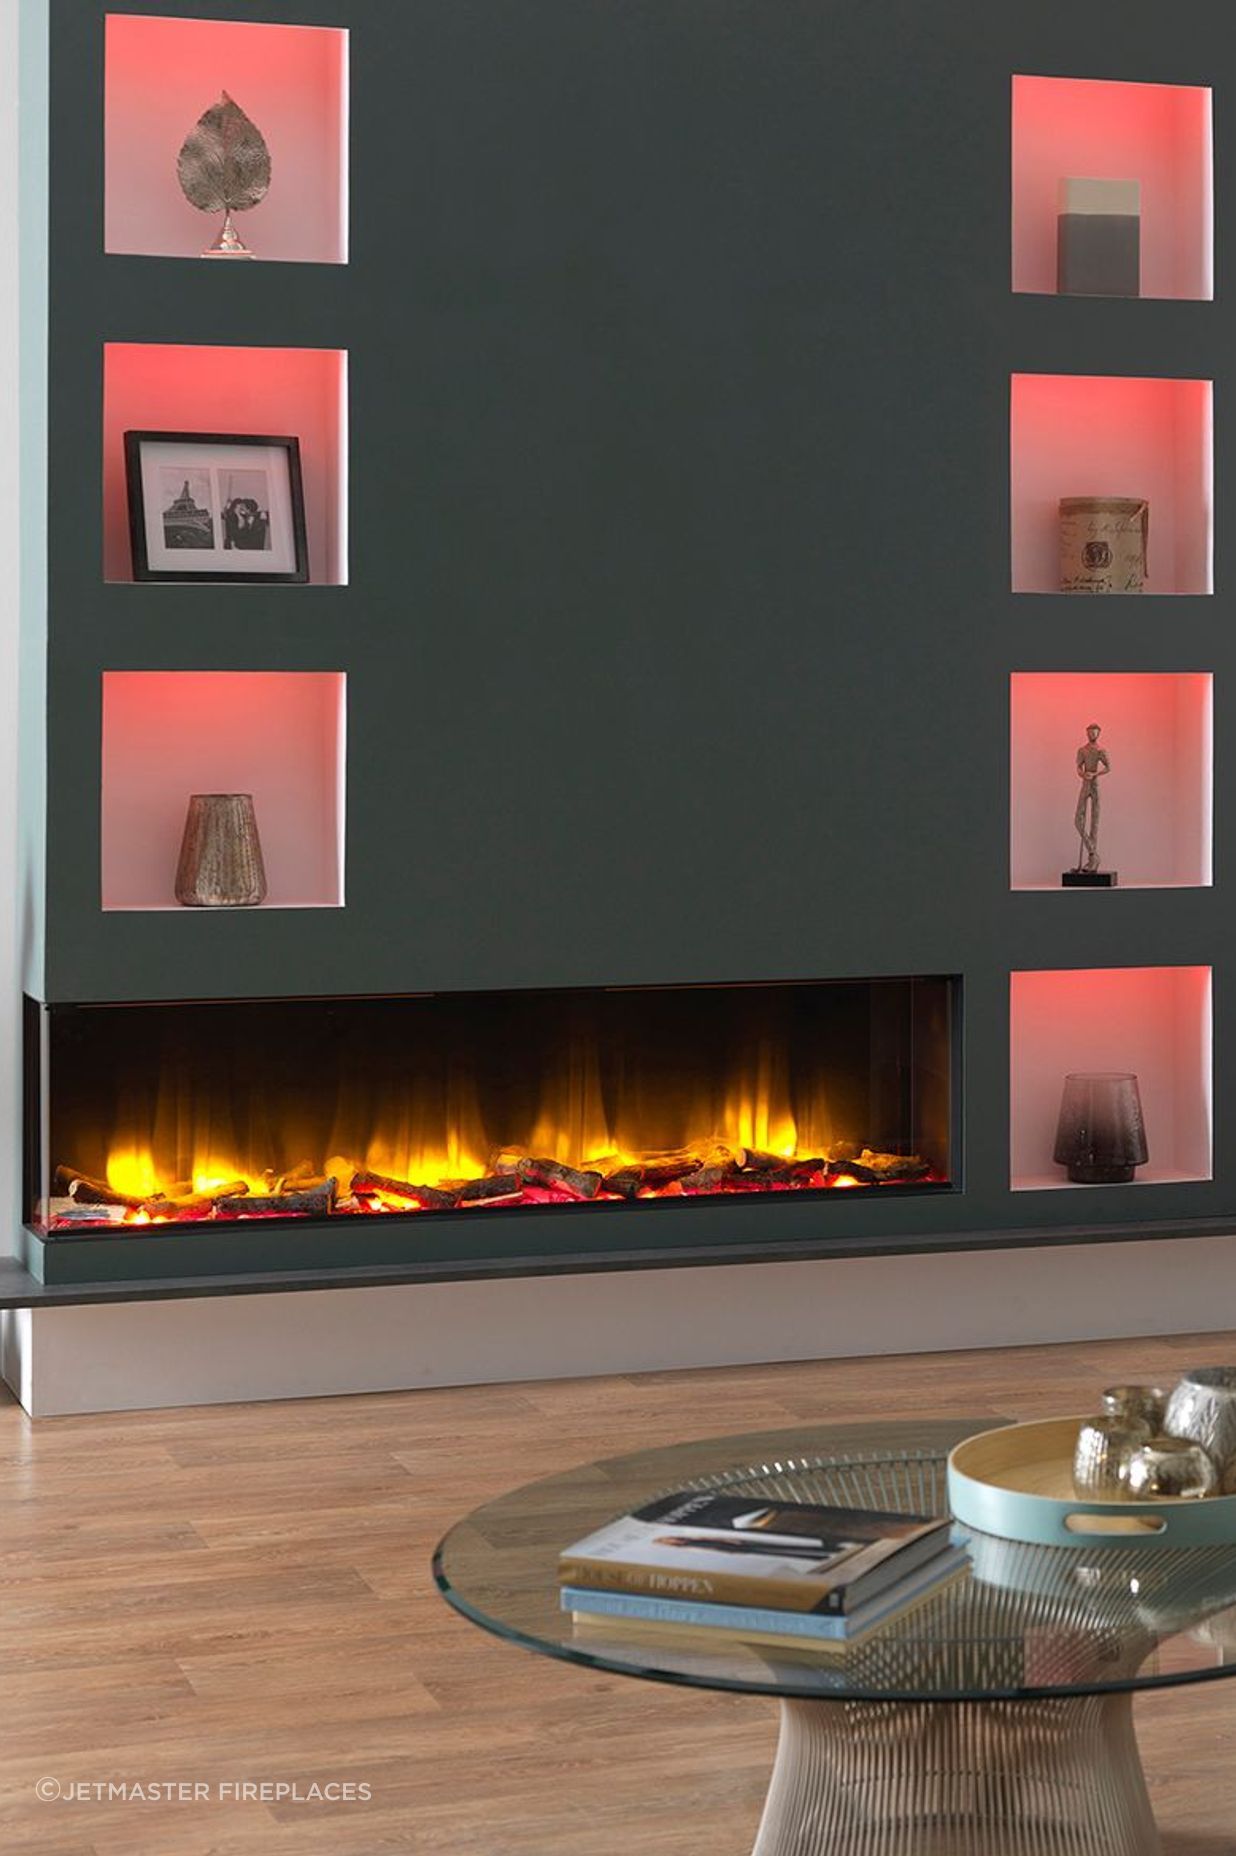 The 1600E Electric Fireplace complements the room's interior lighting with its own warm glow.